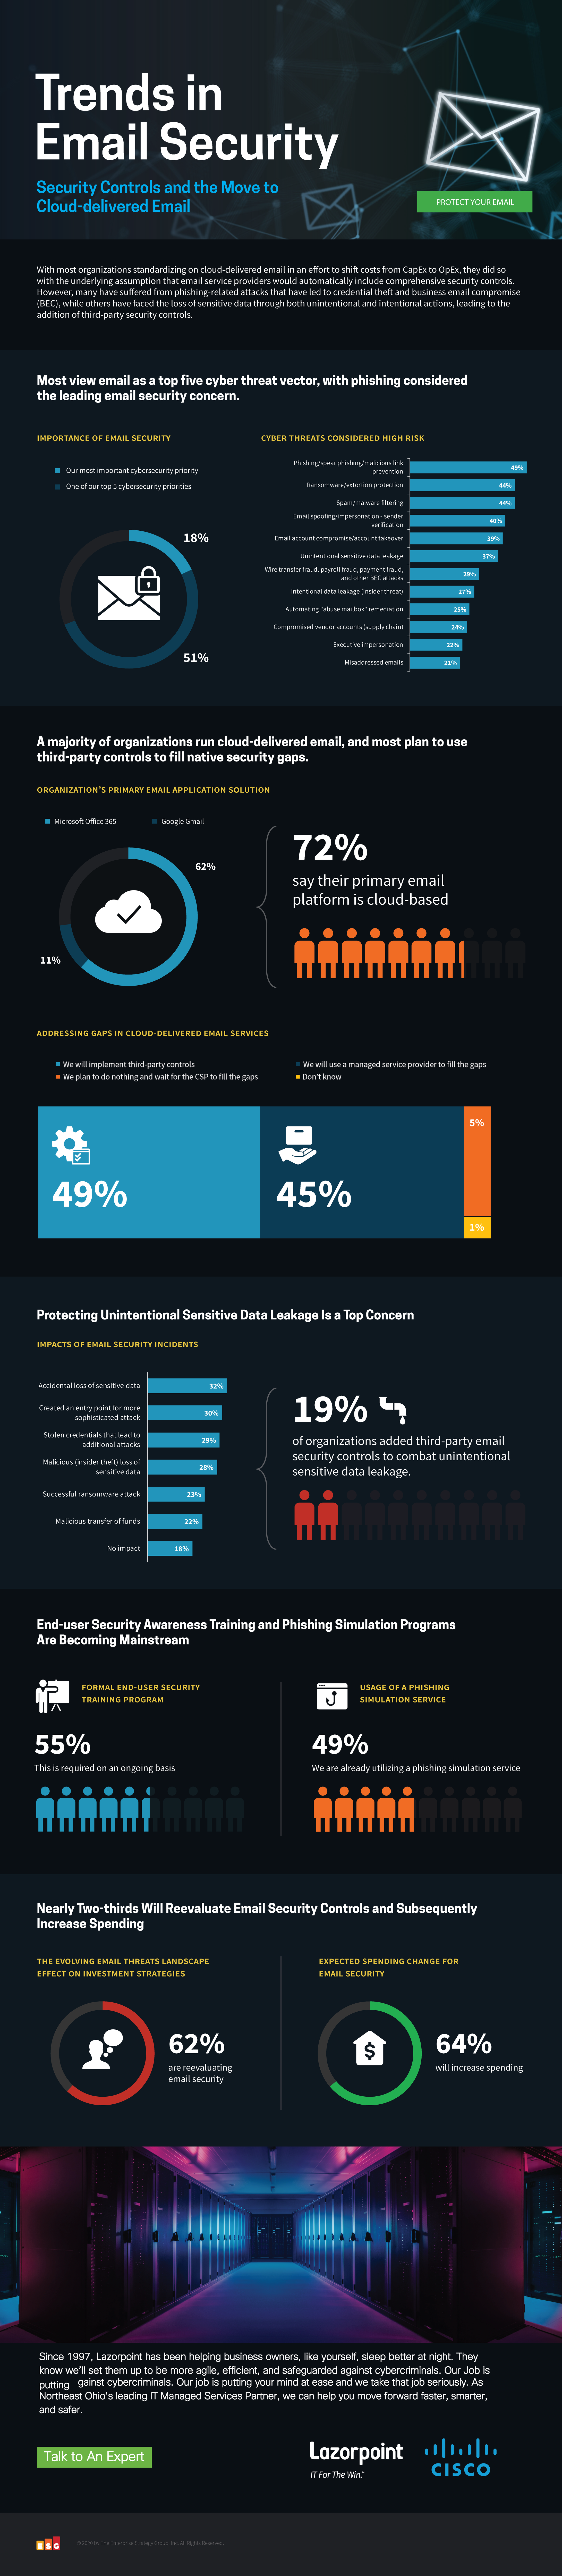 Trends in Email Security Infographic